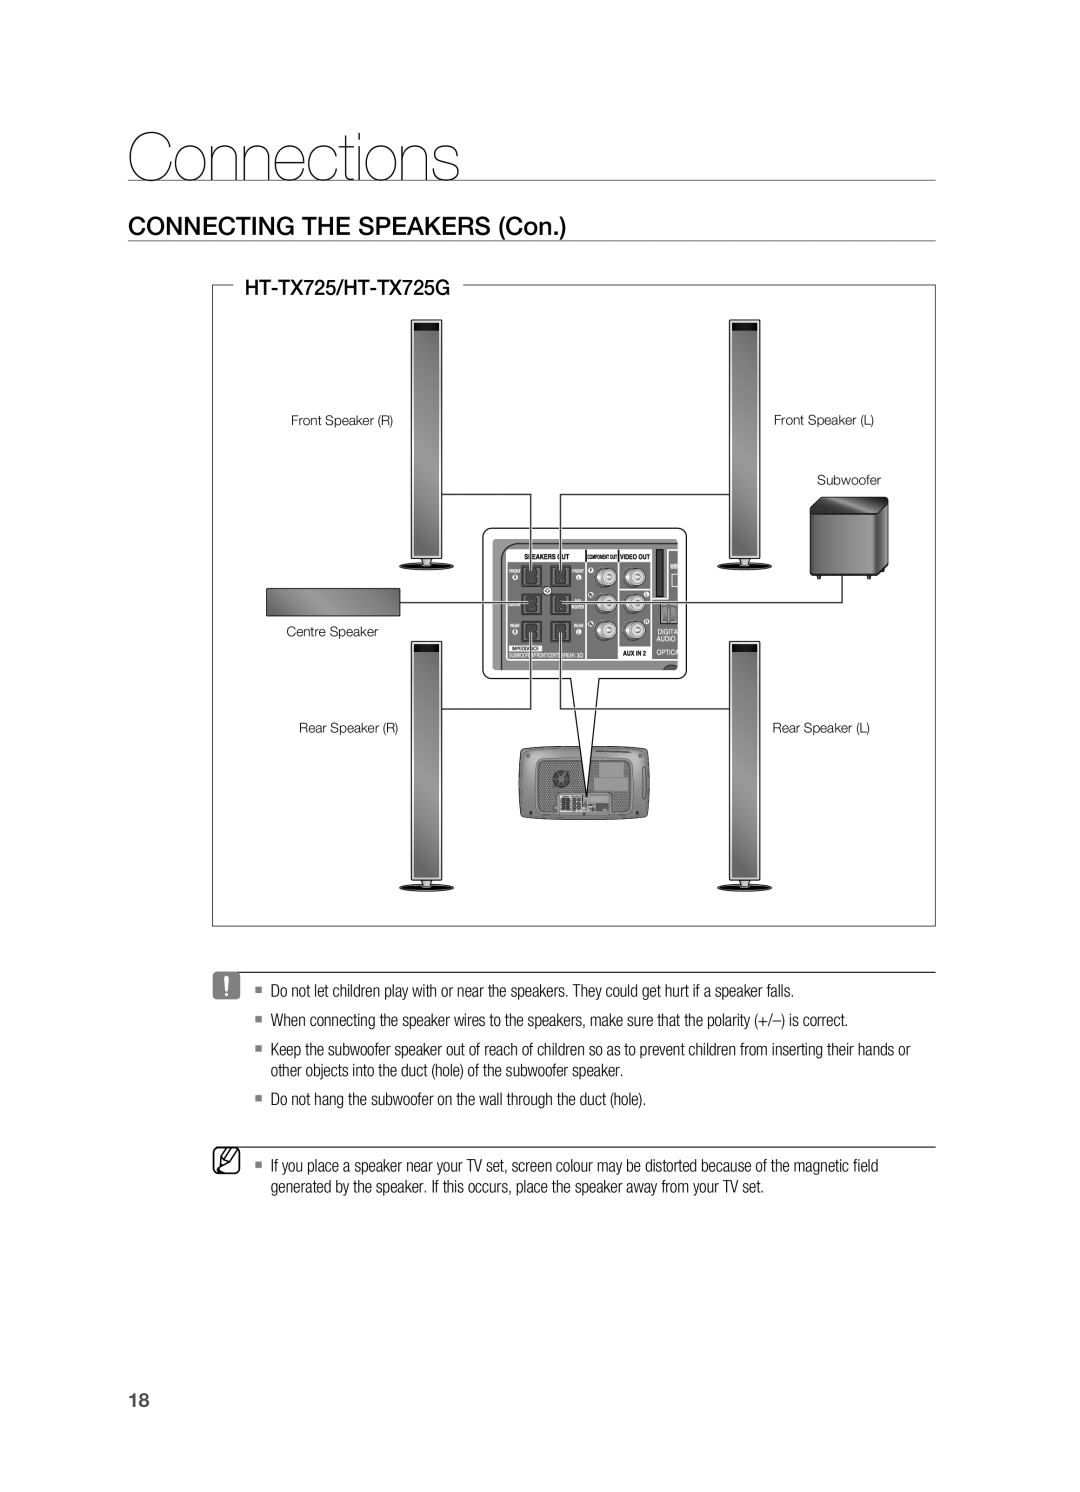 Samsung HT-X725G user manual Connecting the Speakers Con, Connections, HT-TX725/HT-TX725G 